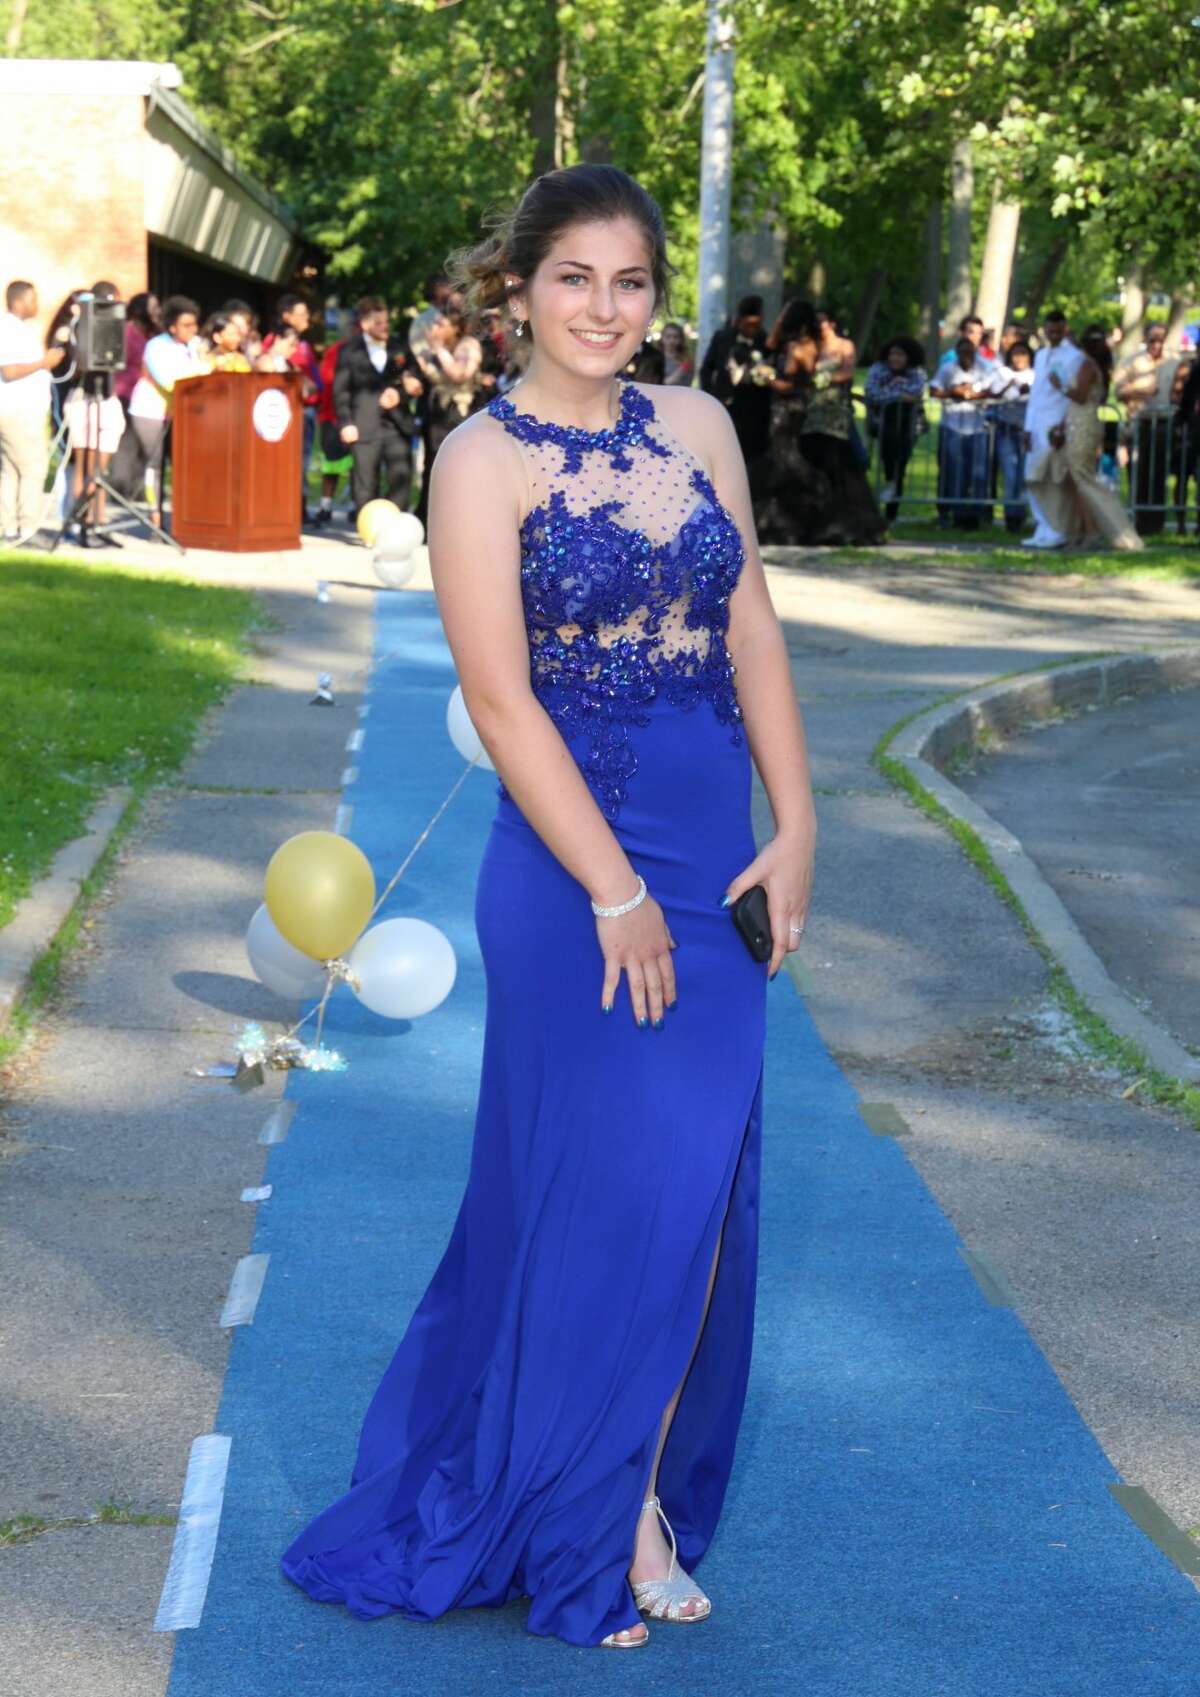 Were you Seen at the Schenectady High School Junior/Senior prom walk-in at the high school on Friday, June 9, 2017?